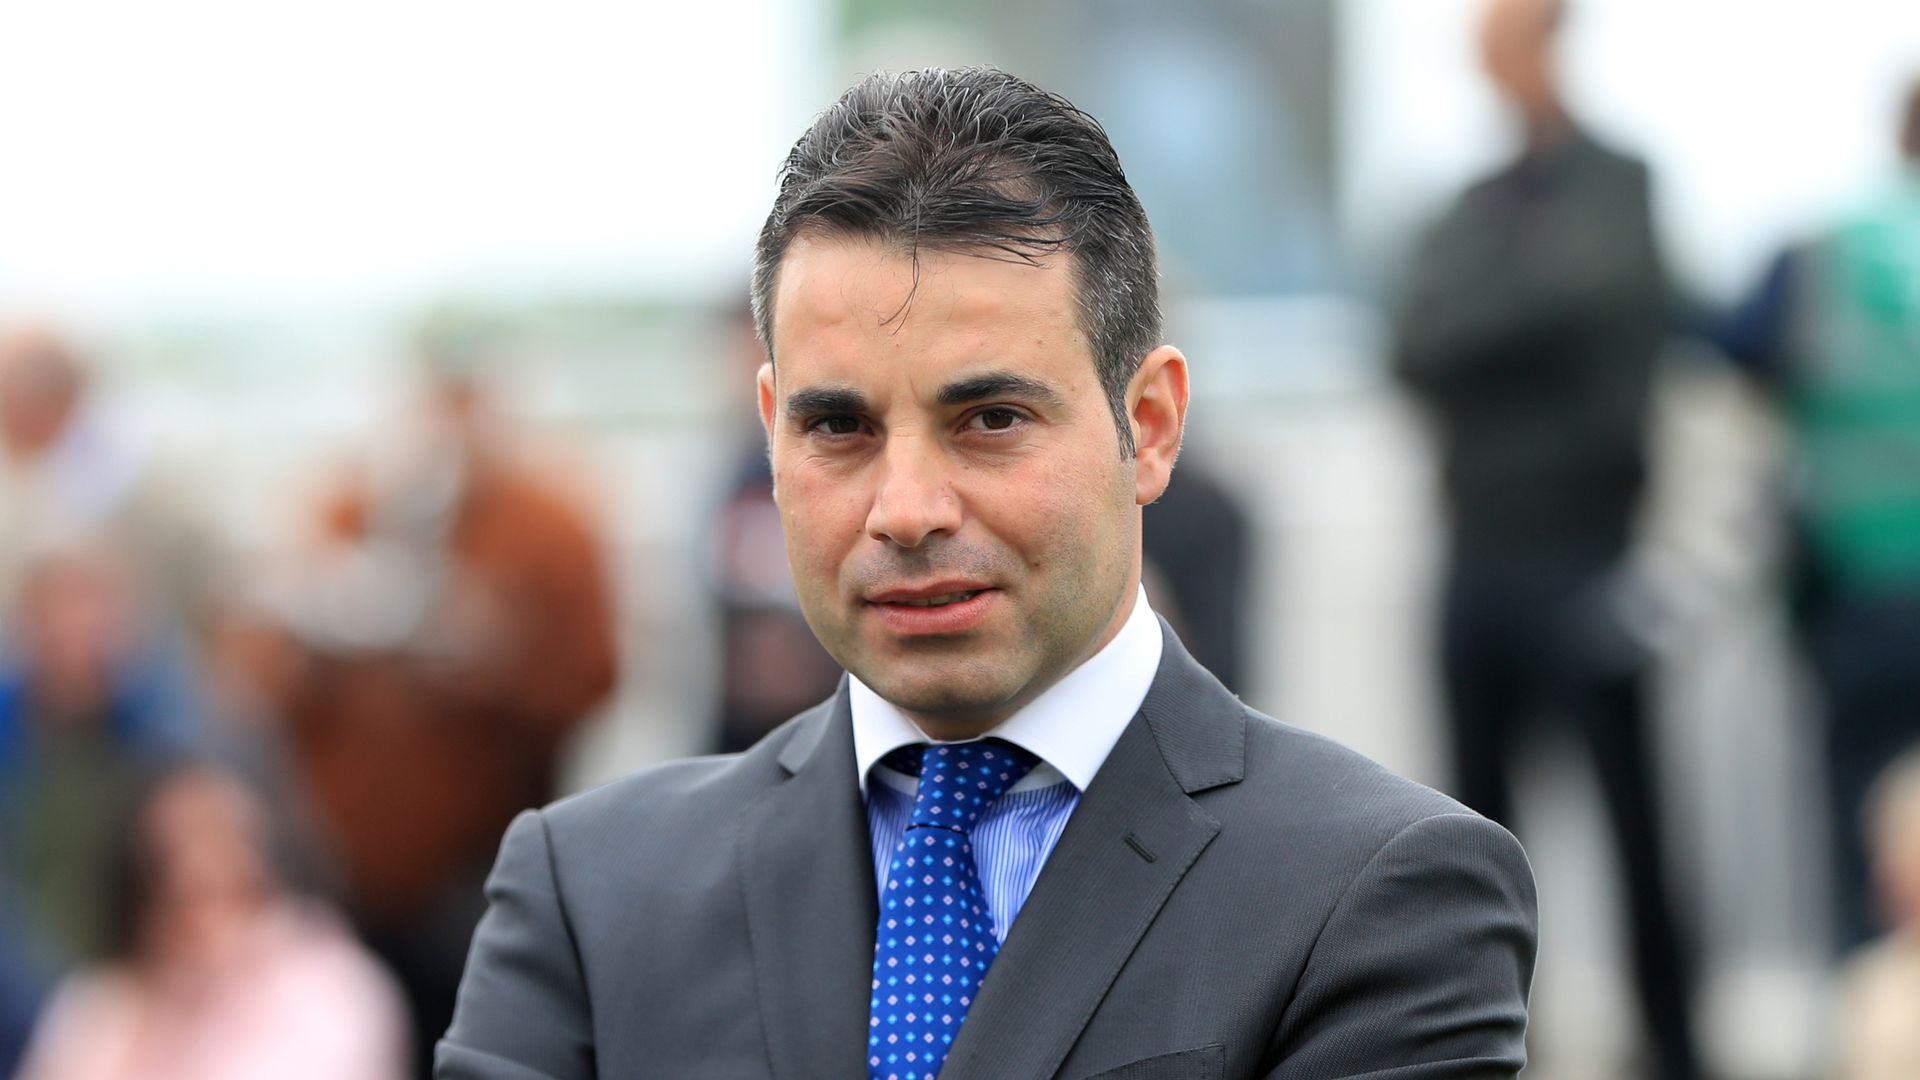 'Worth a shot' - Botti to send Giavellotto straight to St Leger